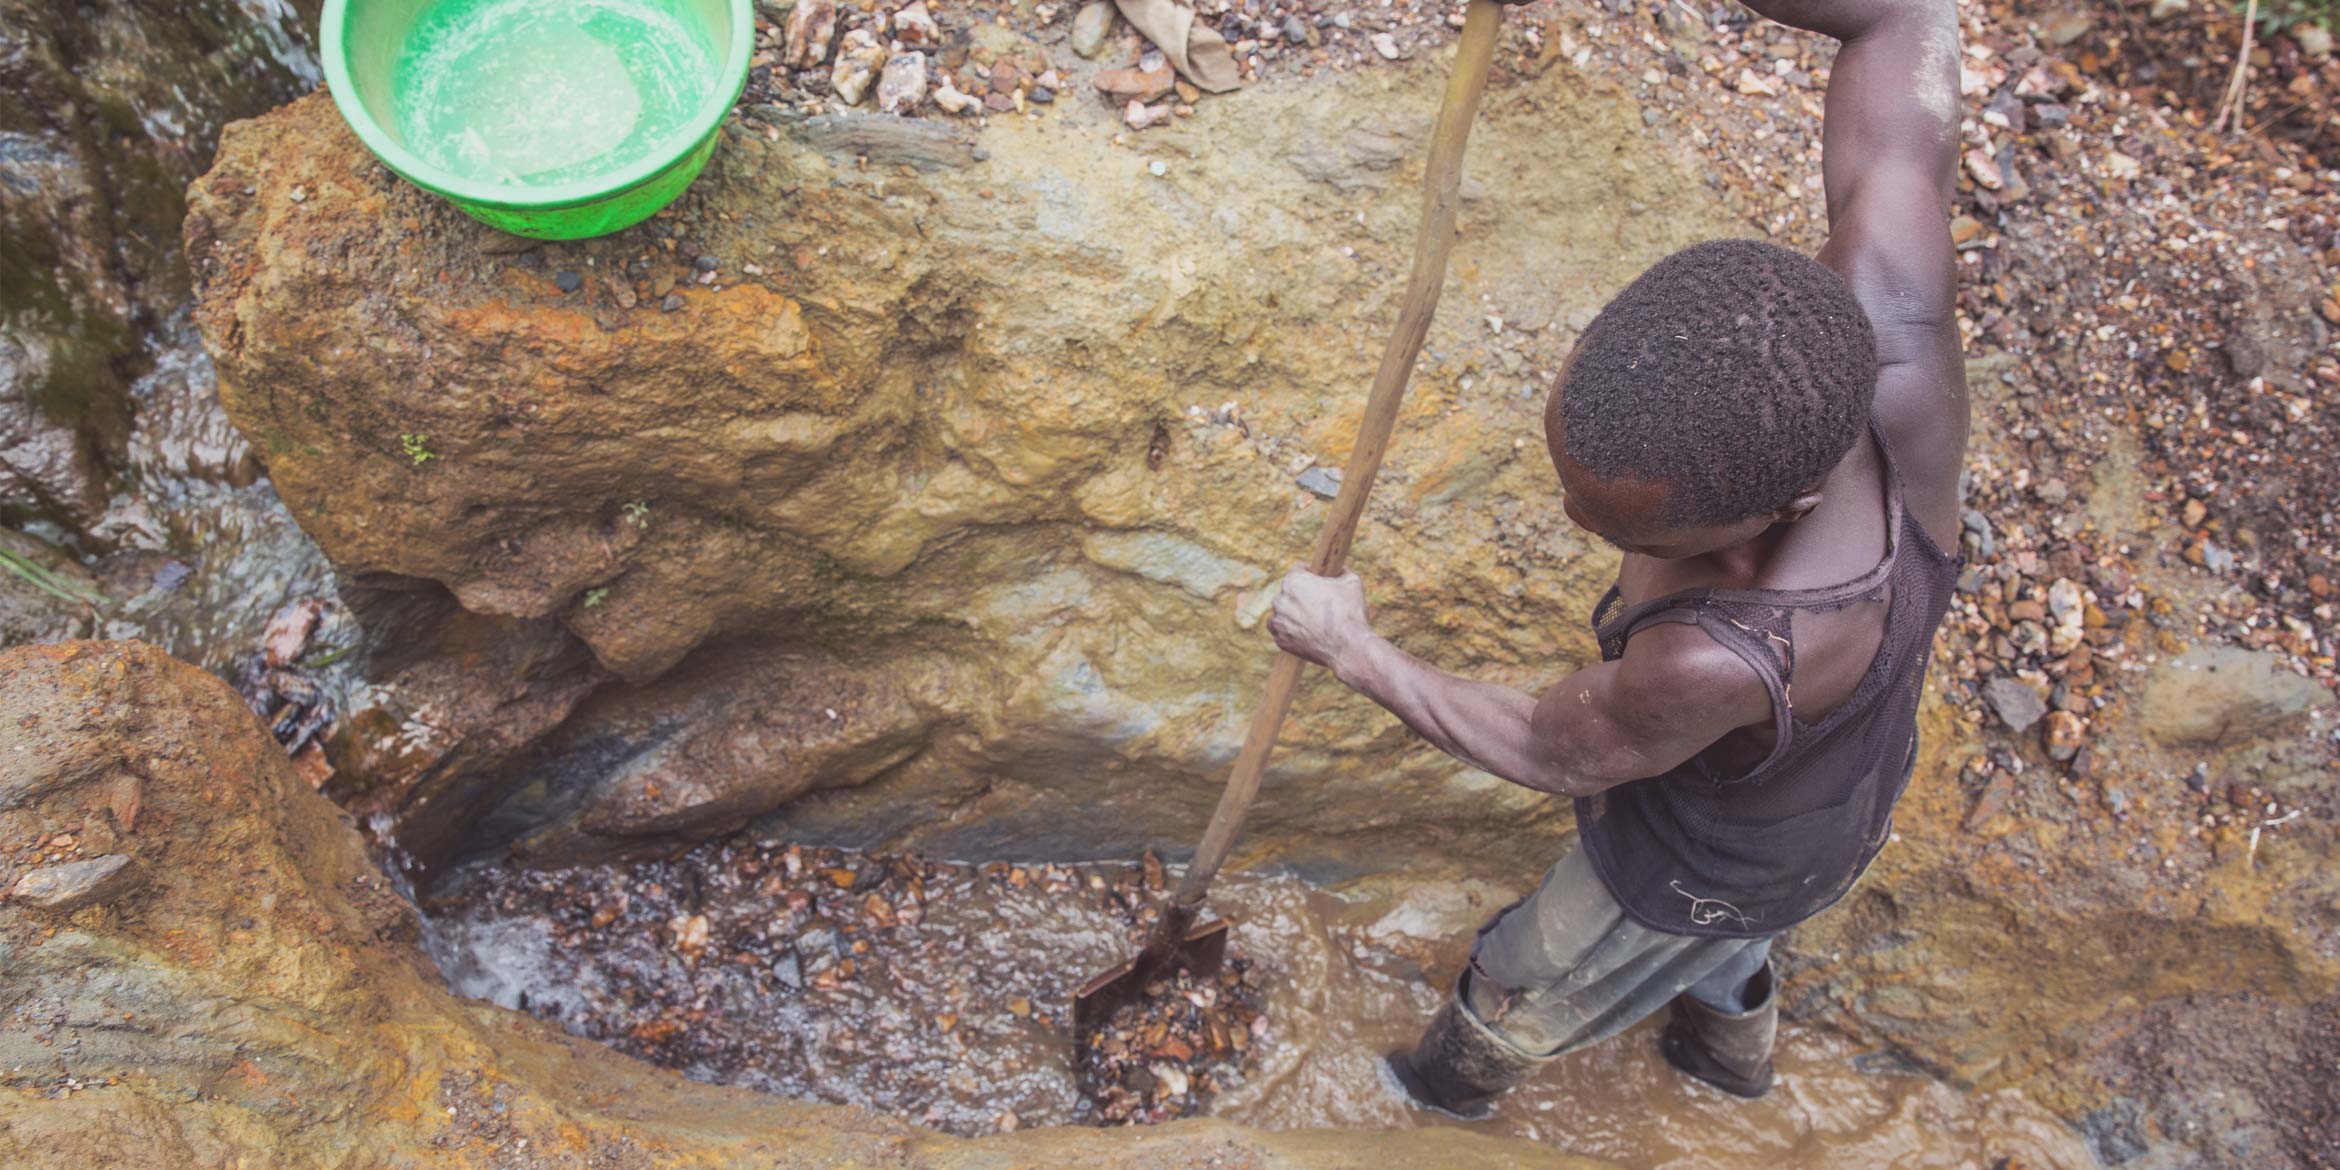 Conflict minerals used in IT products drive wars and human rights abuses